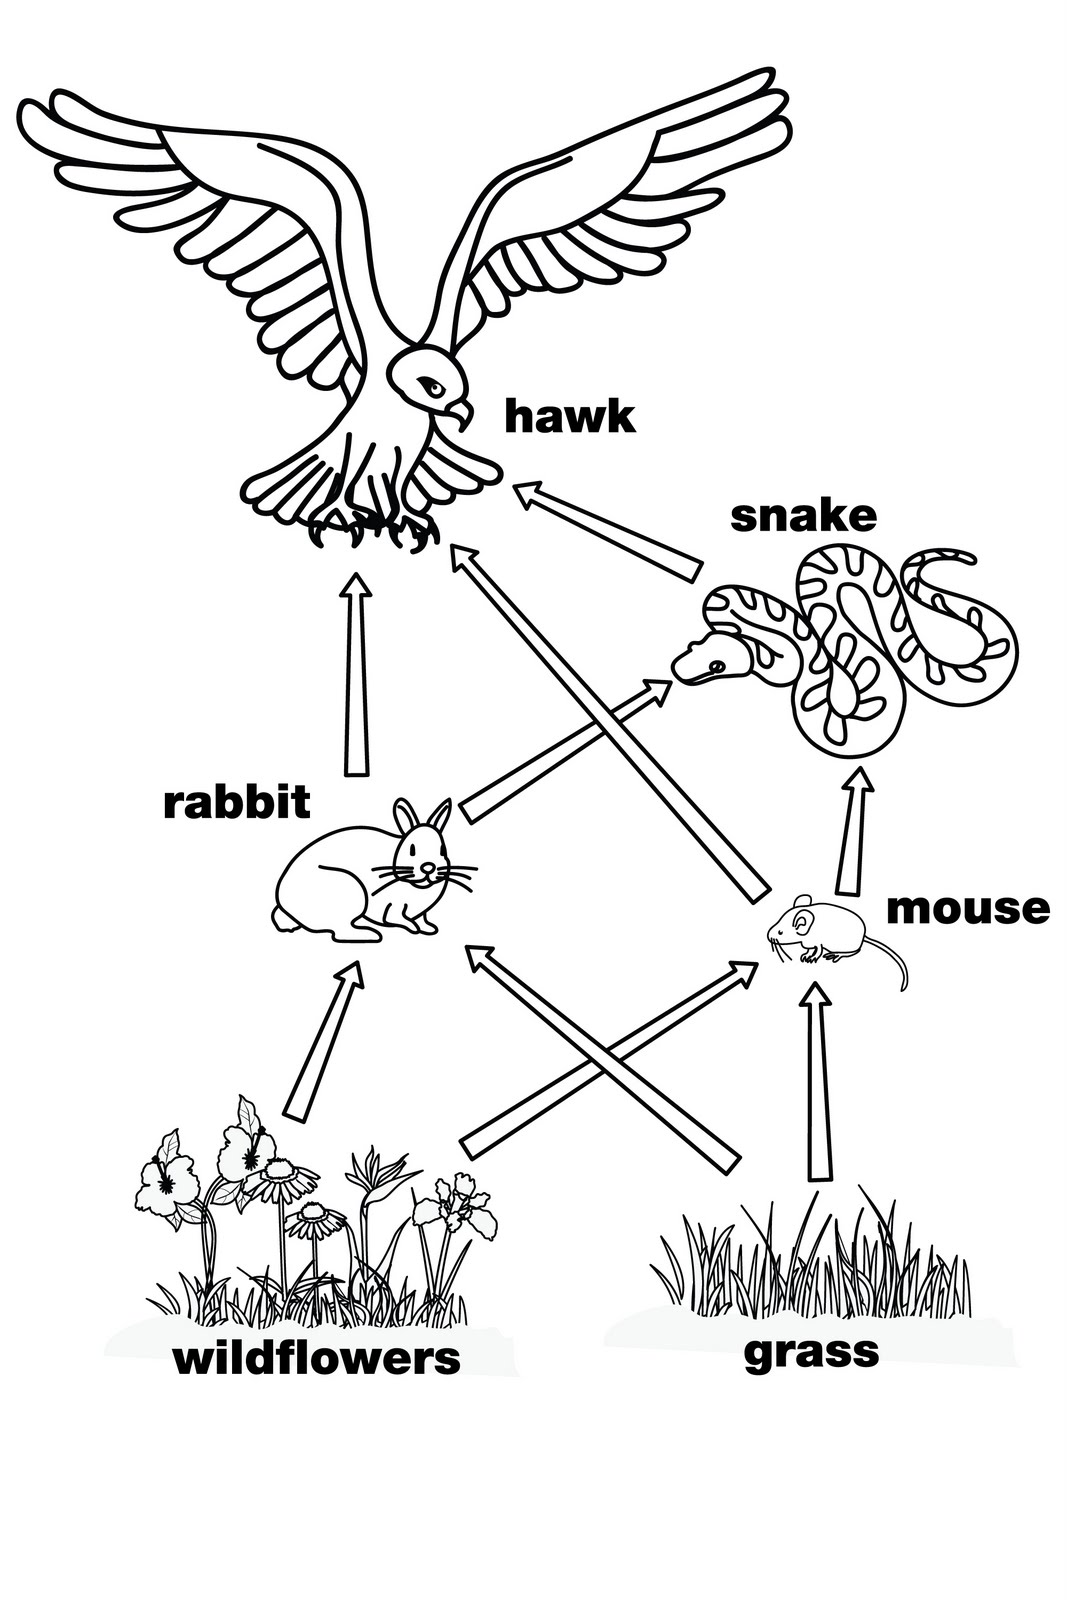 Food chain clipart black and white 